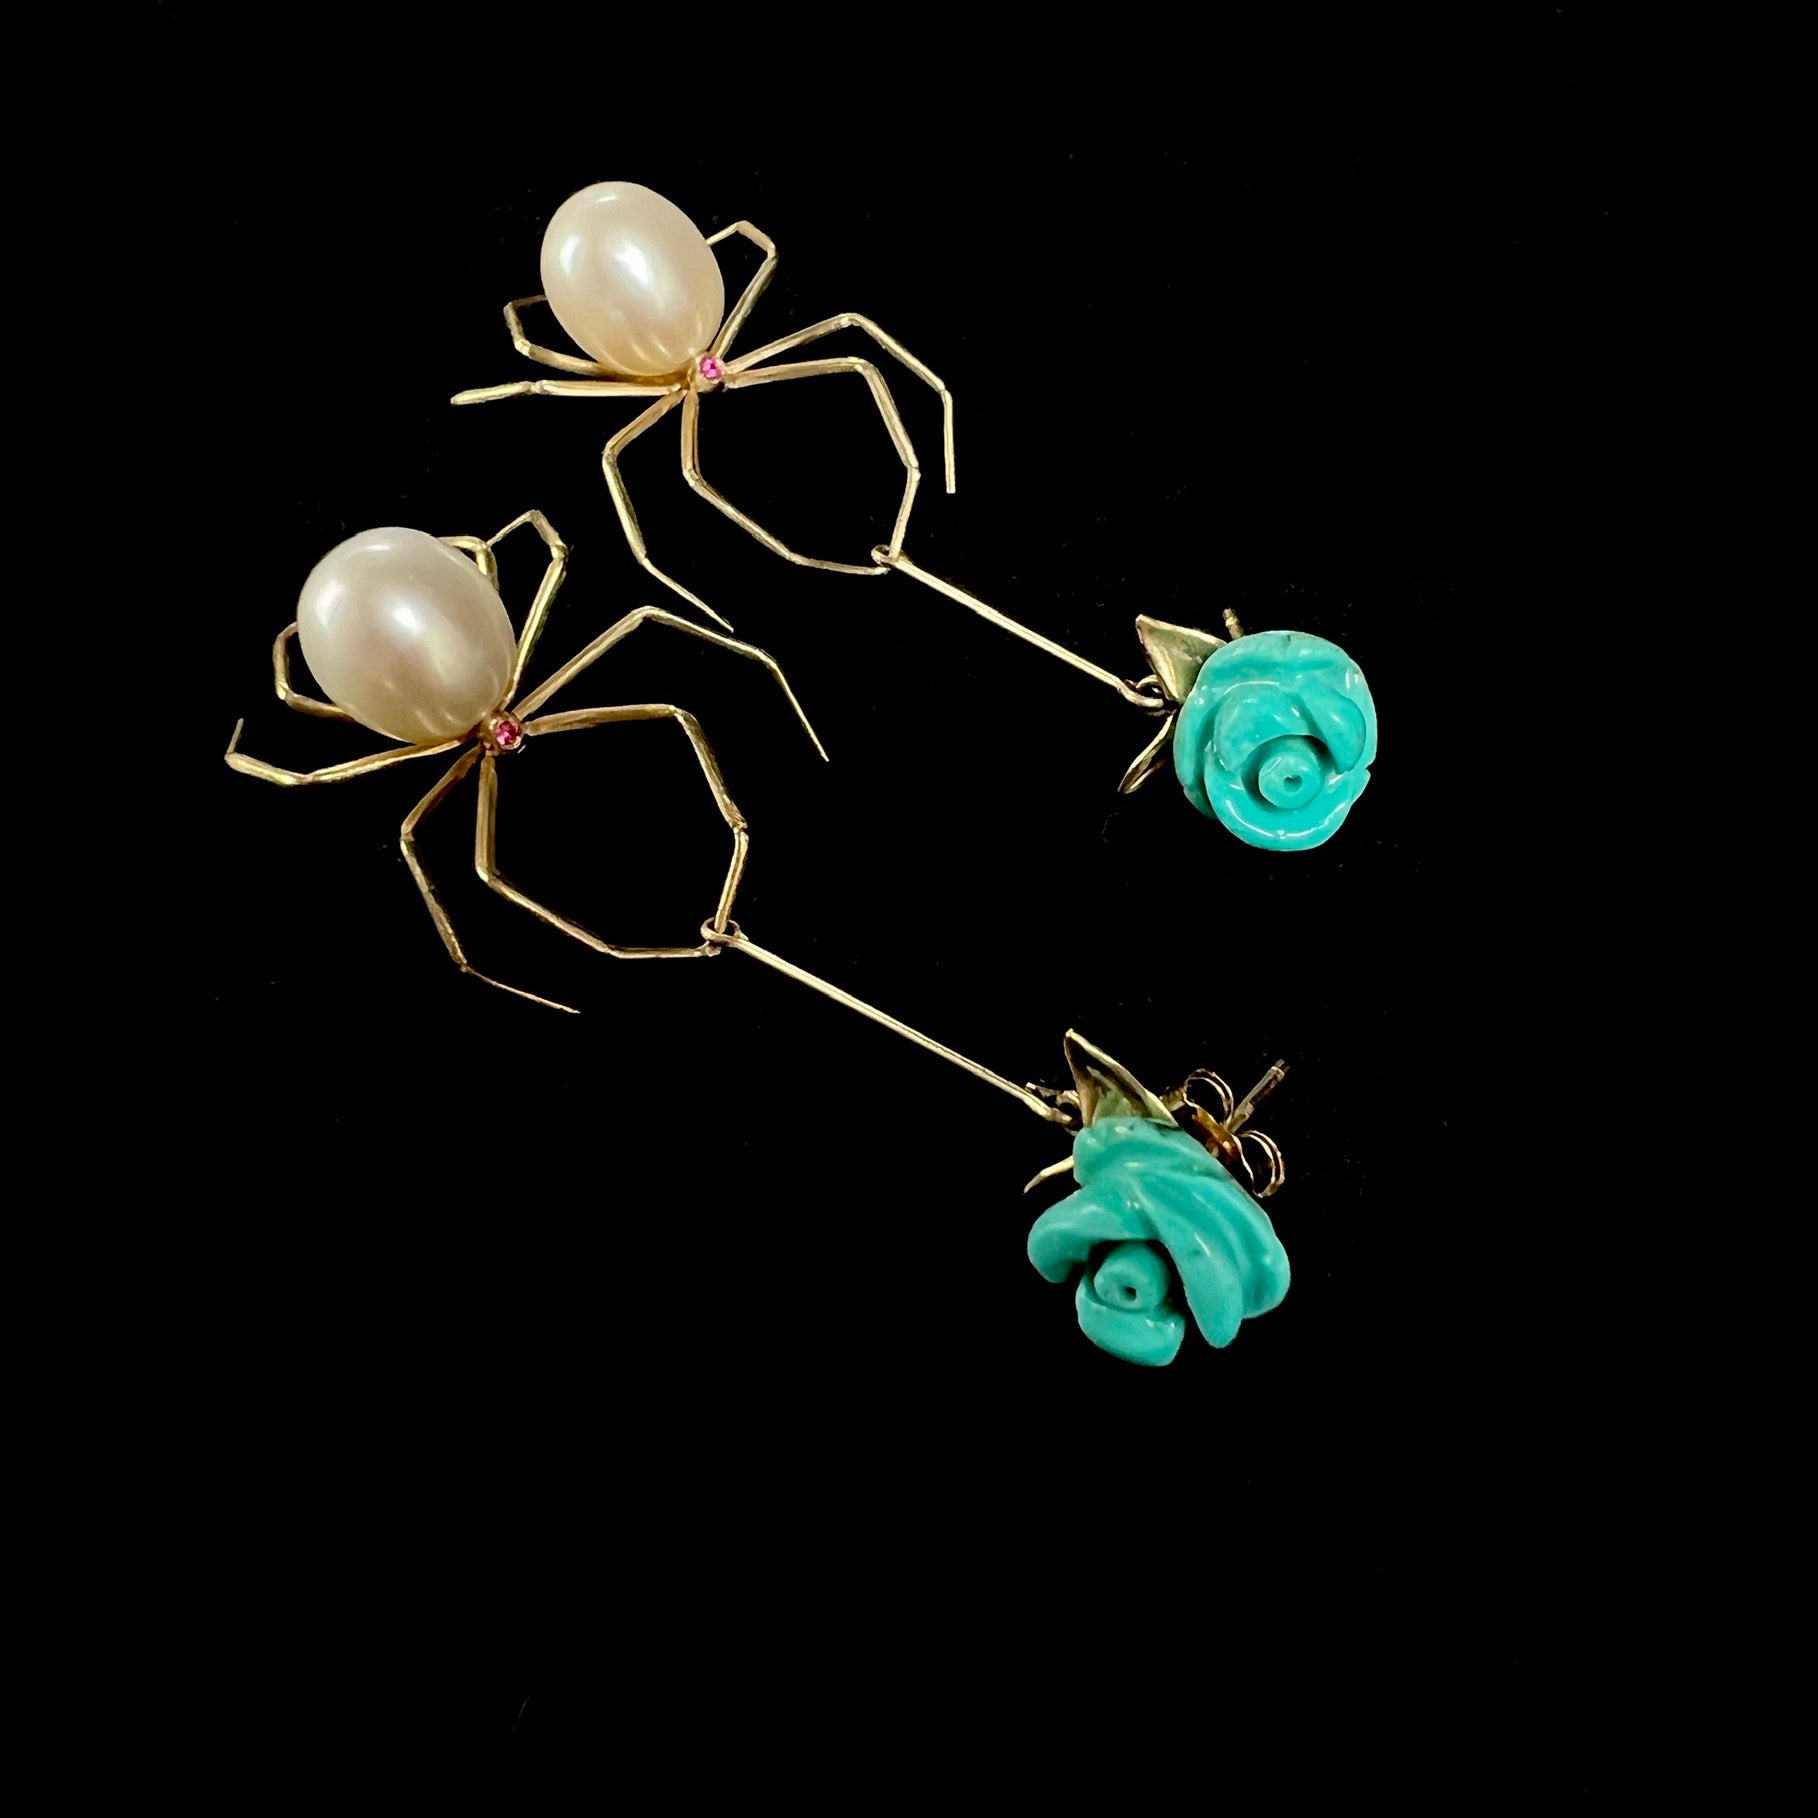 Turquoise rose details with post earring-backs